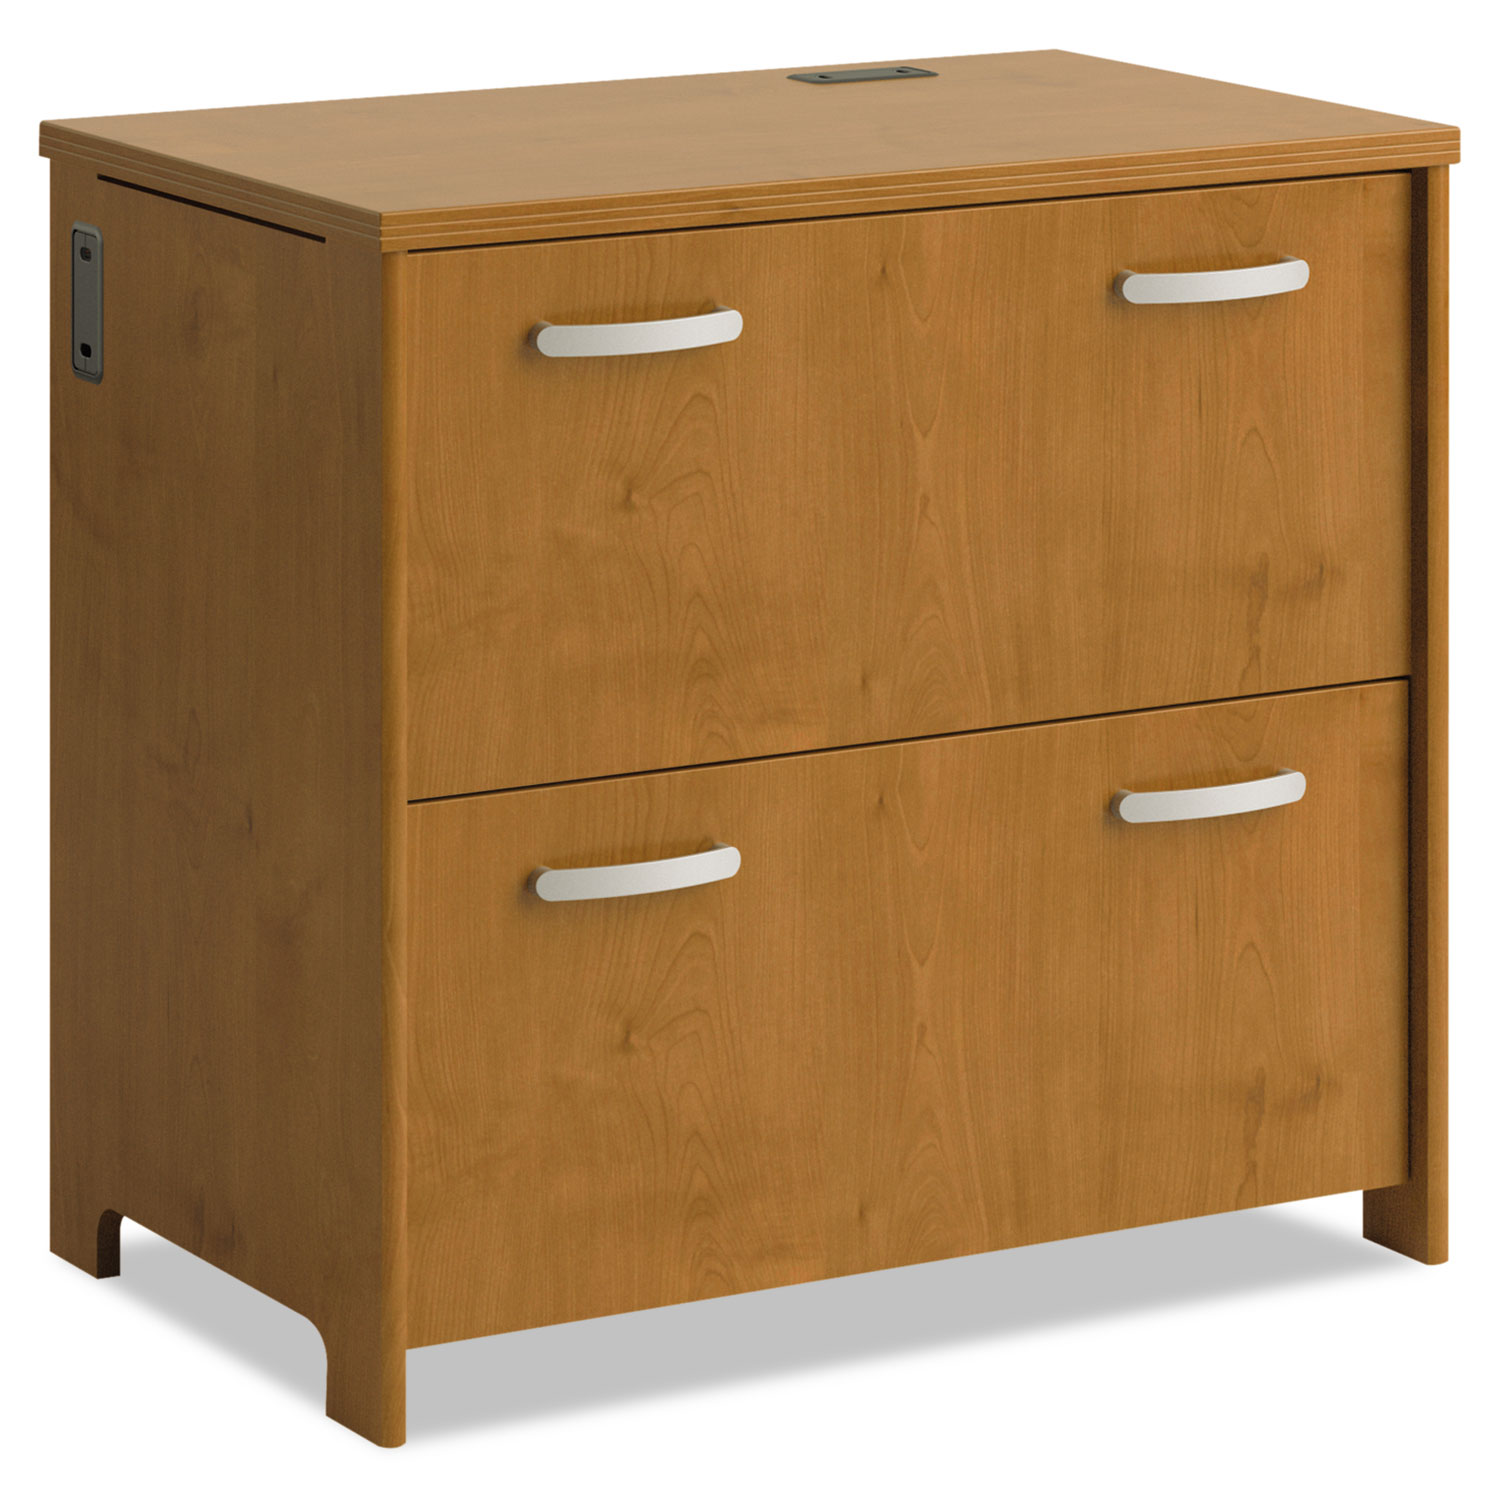 Envoy Series Two-Drawer Lateral File, 32w x 20d x 30 1/4h, Natural Cherry